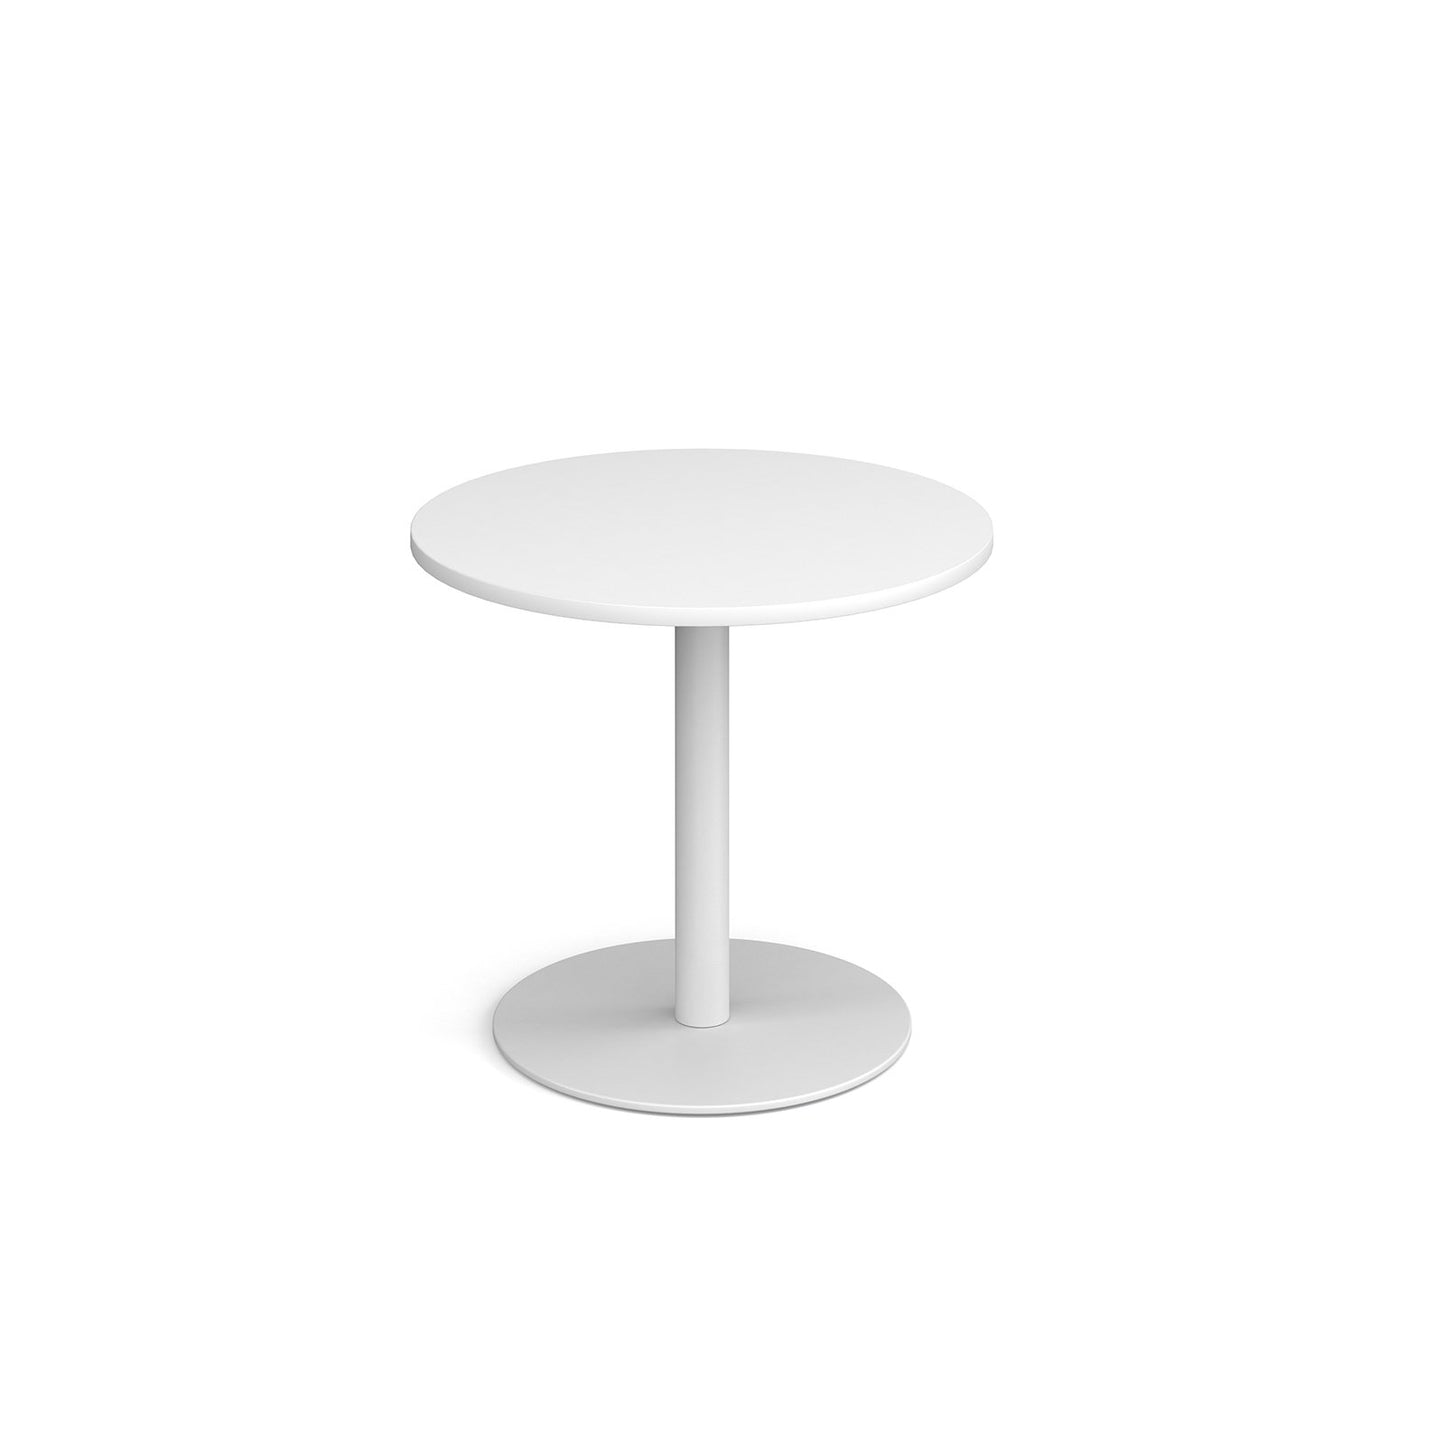 Monza circular dining table with flat round base